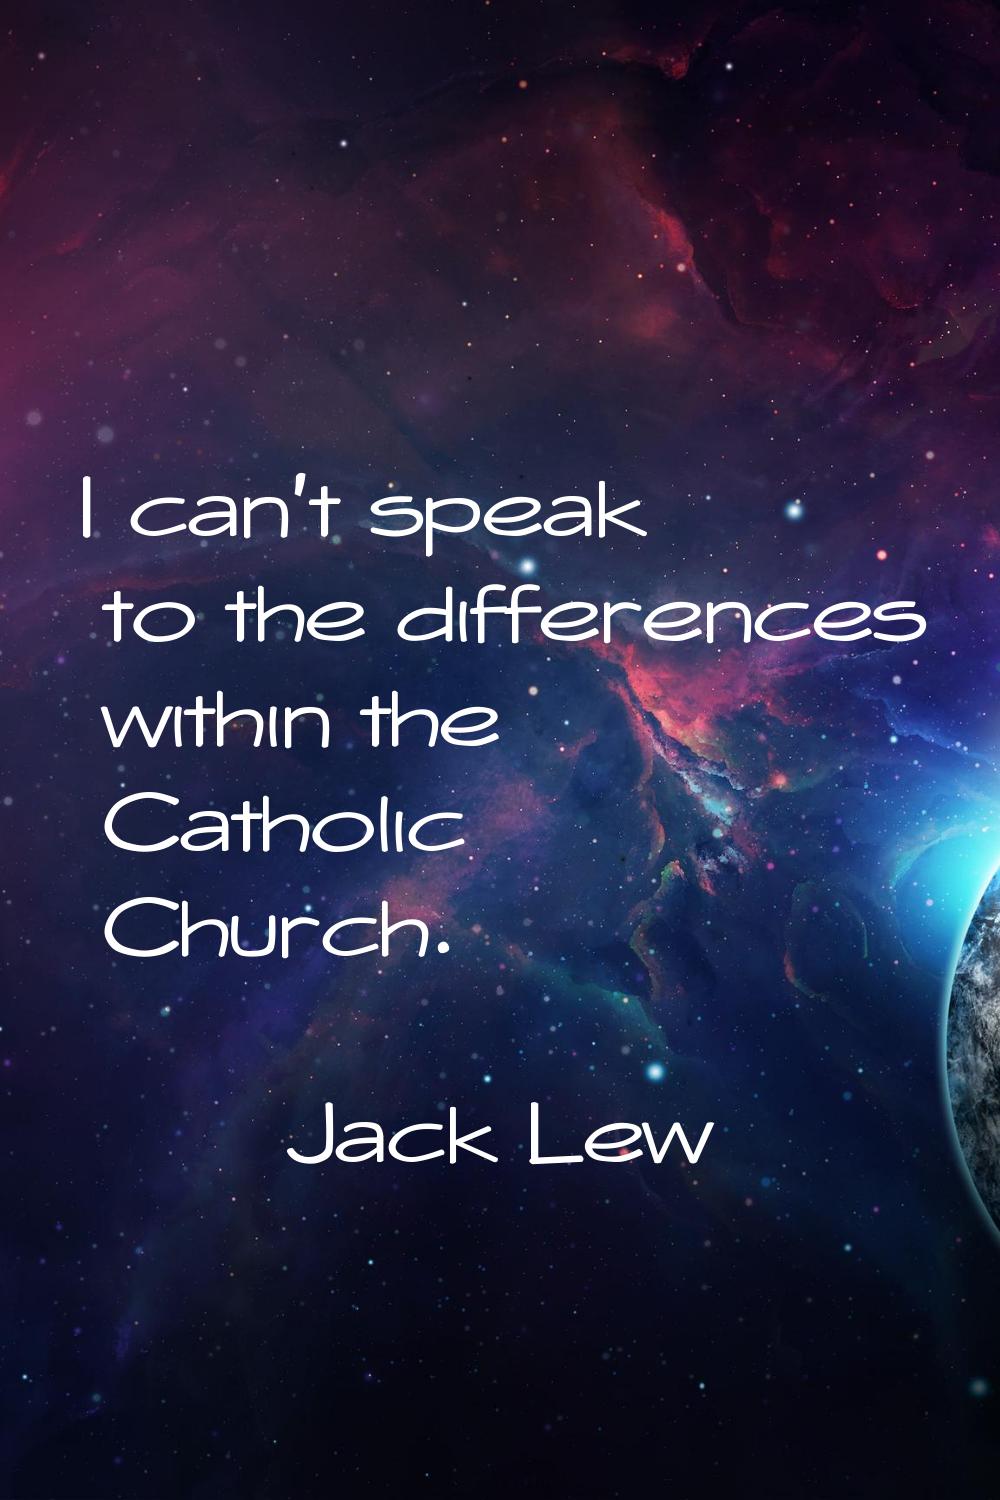 I can't speak to the differences within the Catholic Church.